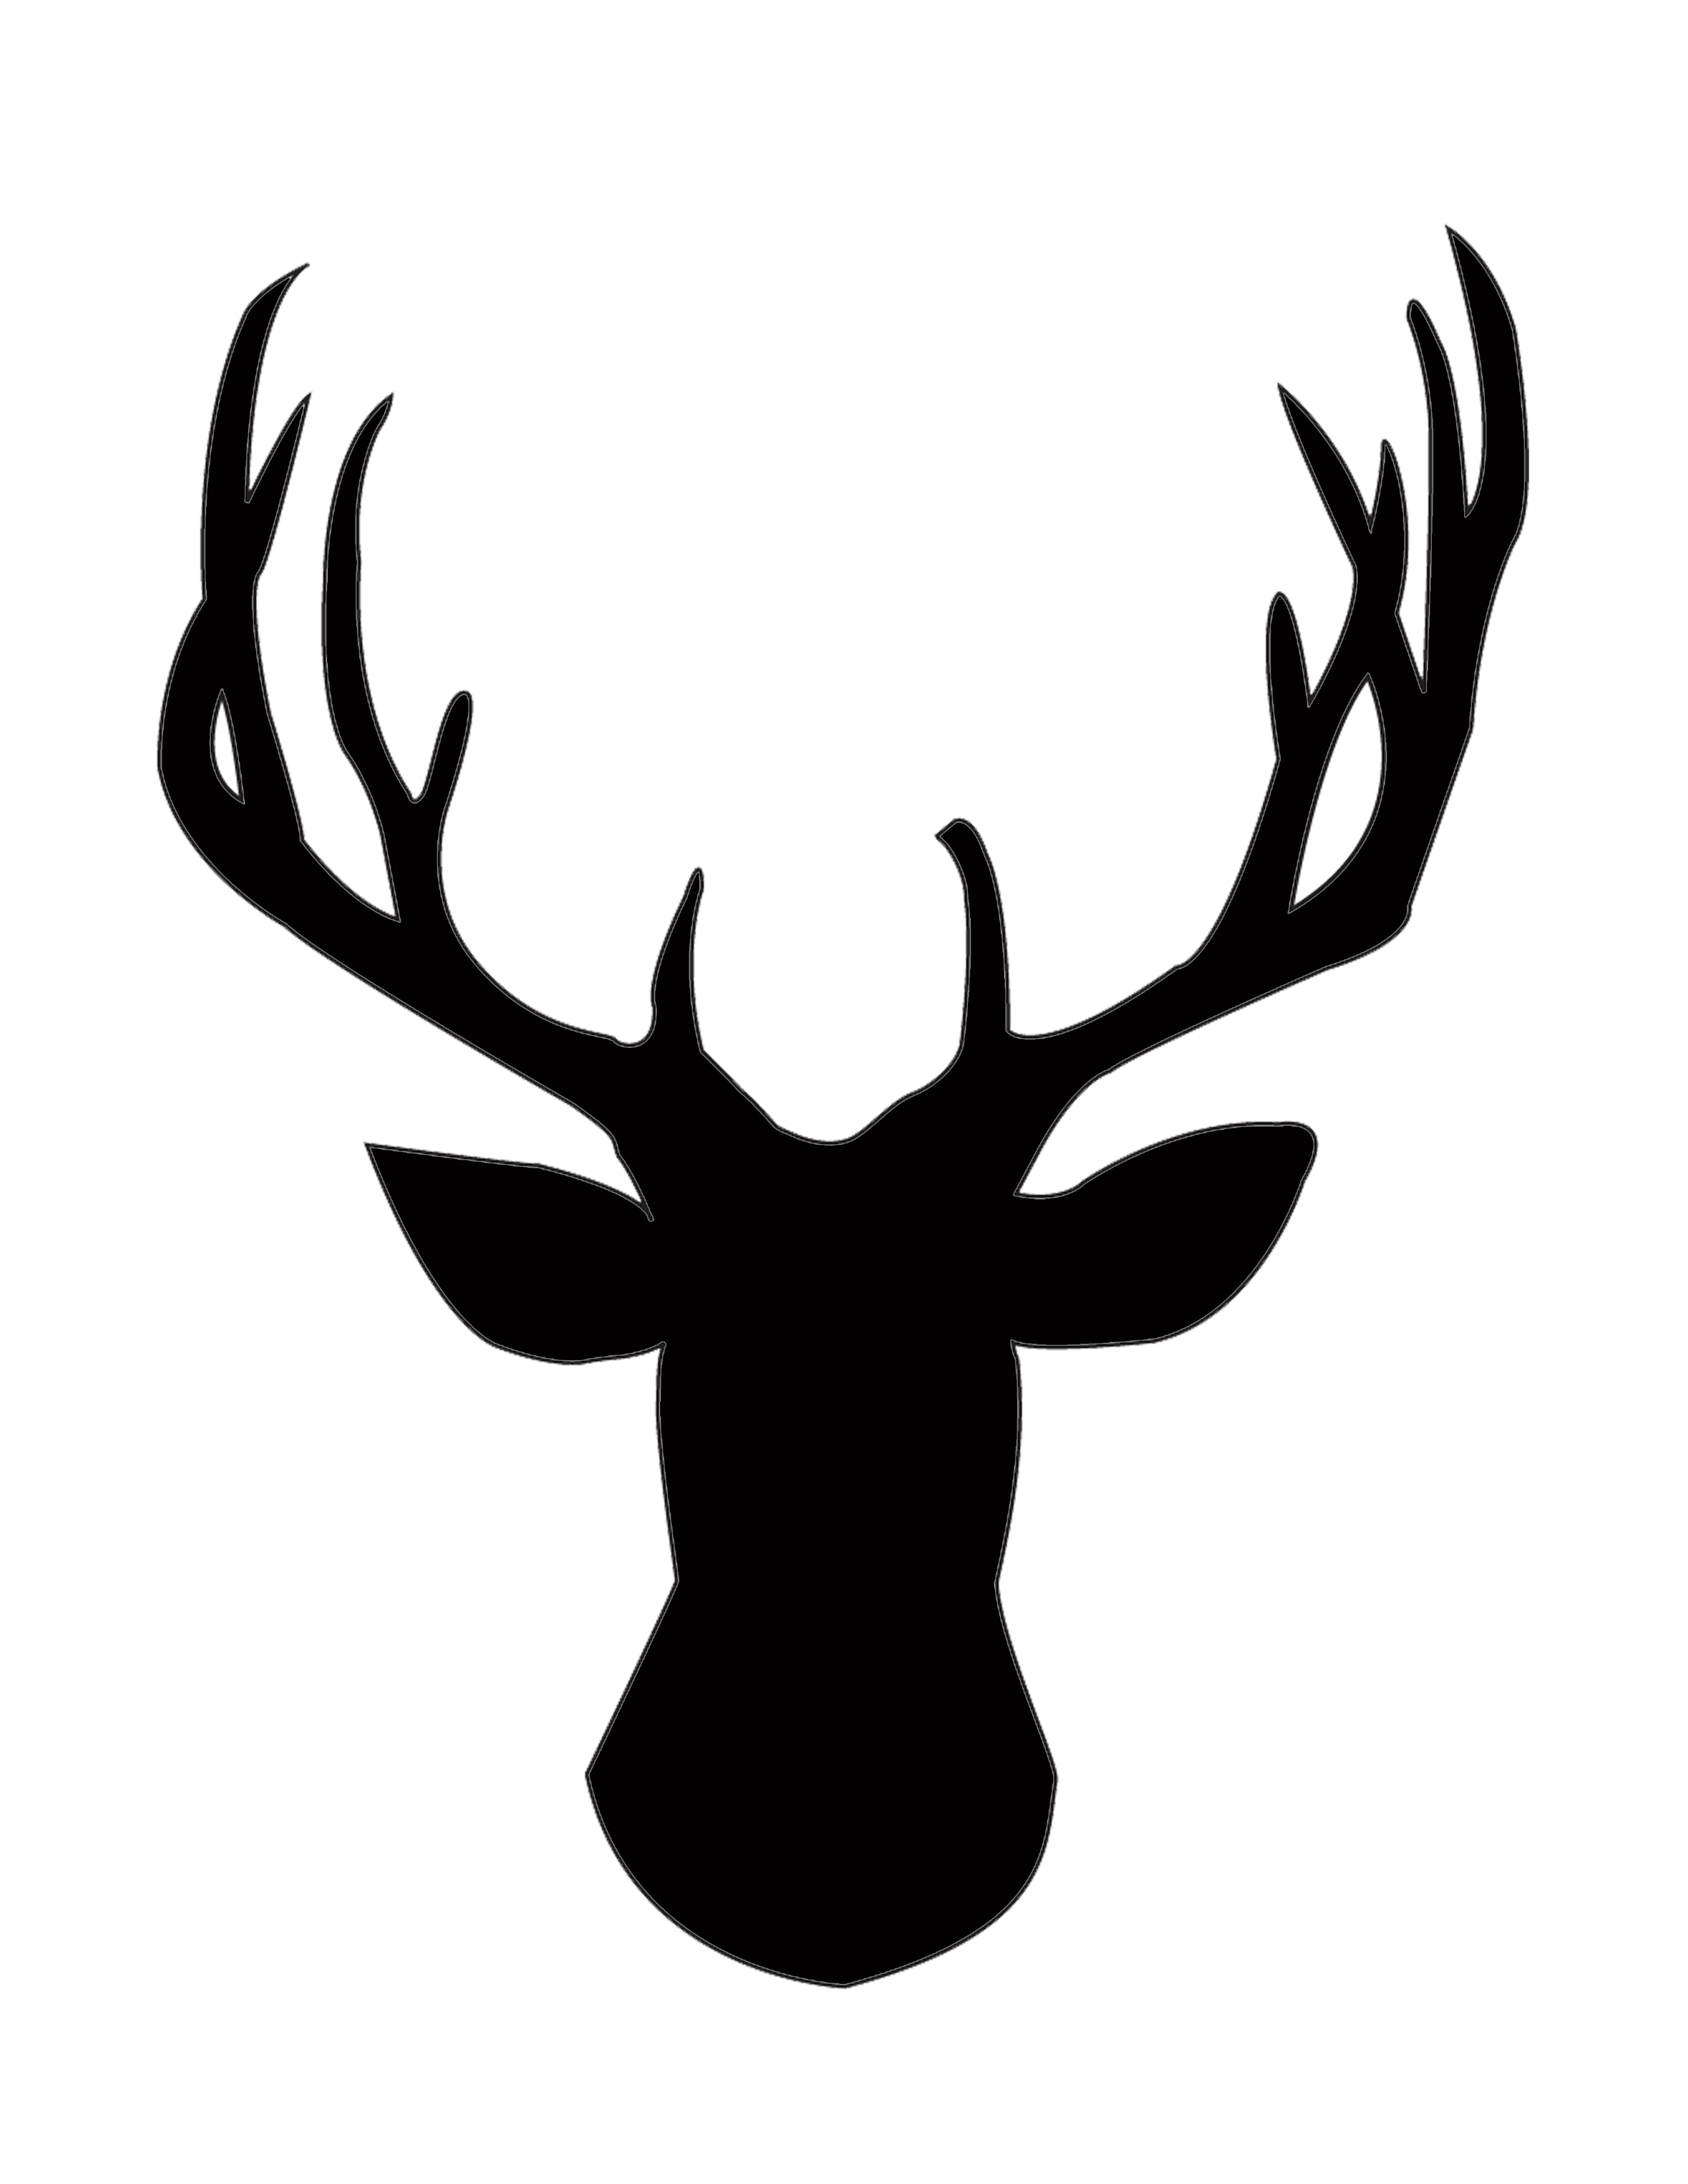 Download buck silhouette clipart - Clipground